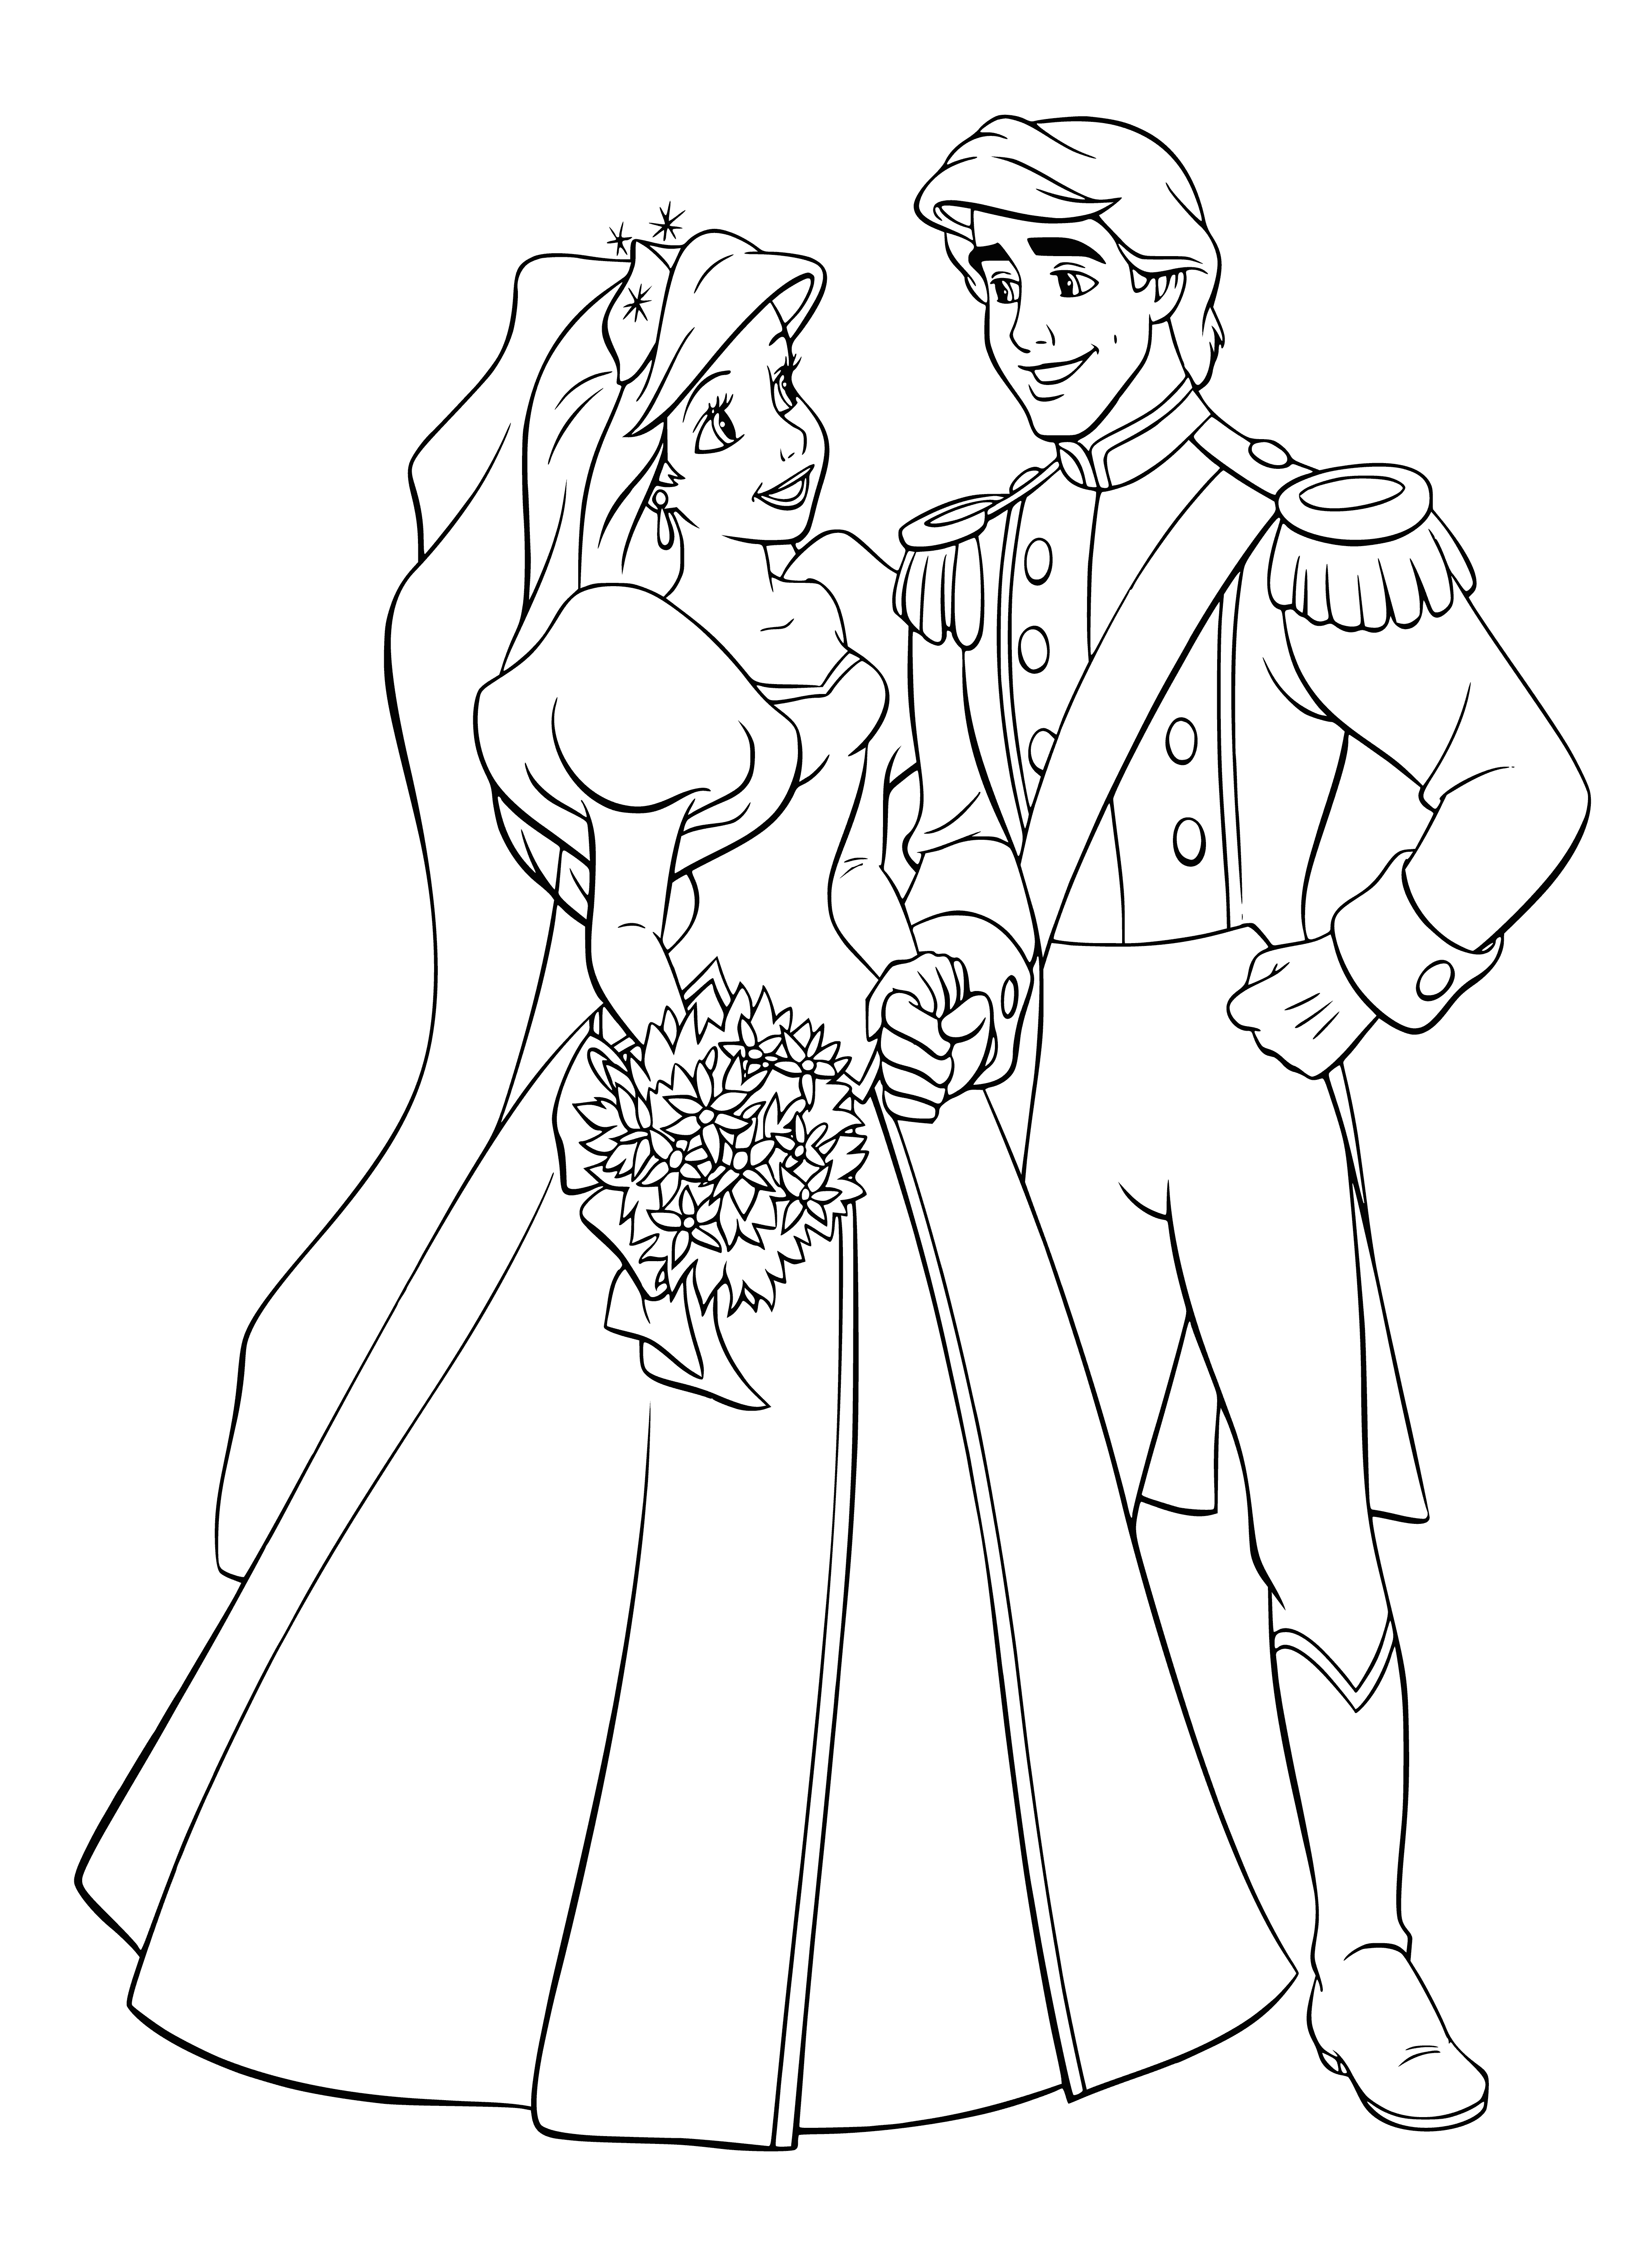 coloring page: A bridge, white swans, archway, table, wedding cake, bride & groom, Ariel in white dress, Eric in black vest, trees, flowers, blue sky - there's a lot to color in this scene!